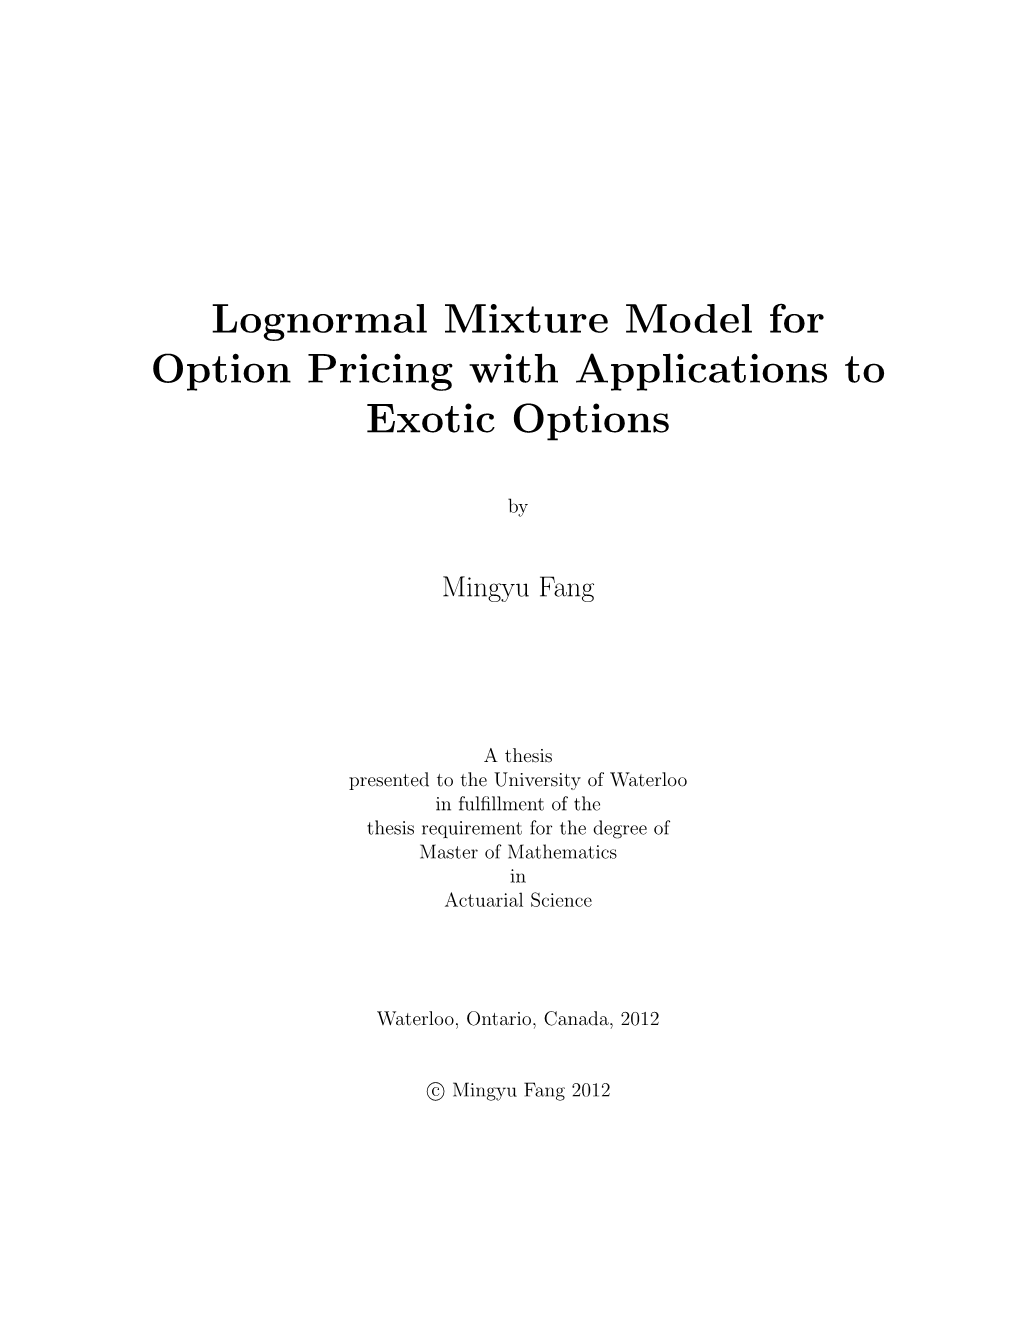 Lognormal Mixture Model for Option Pricing with Applications to Exotic Options